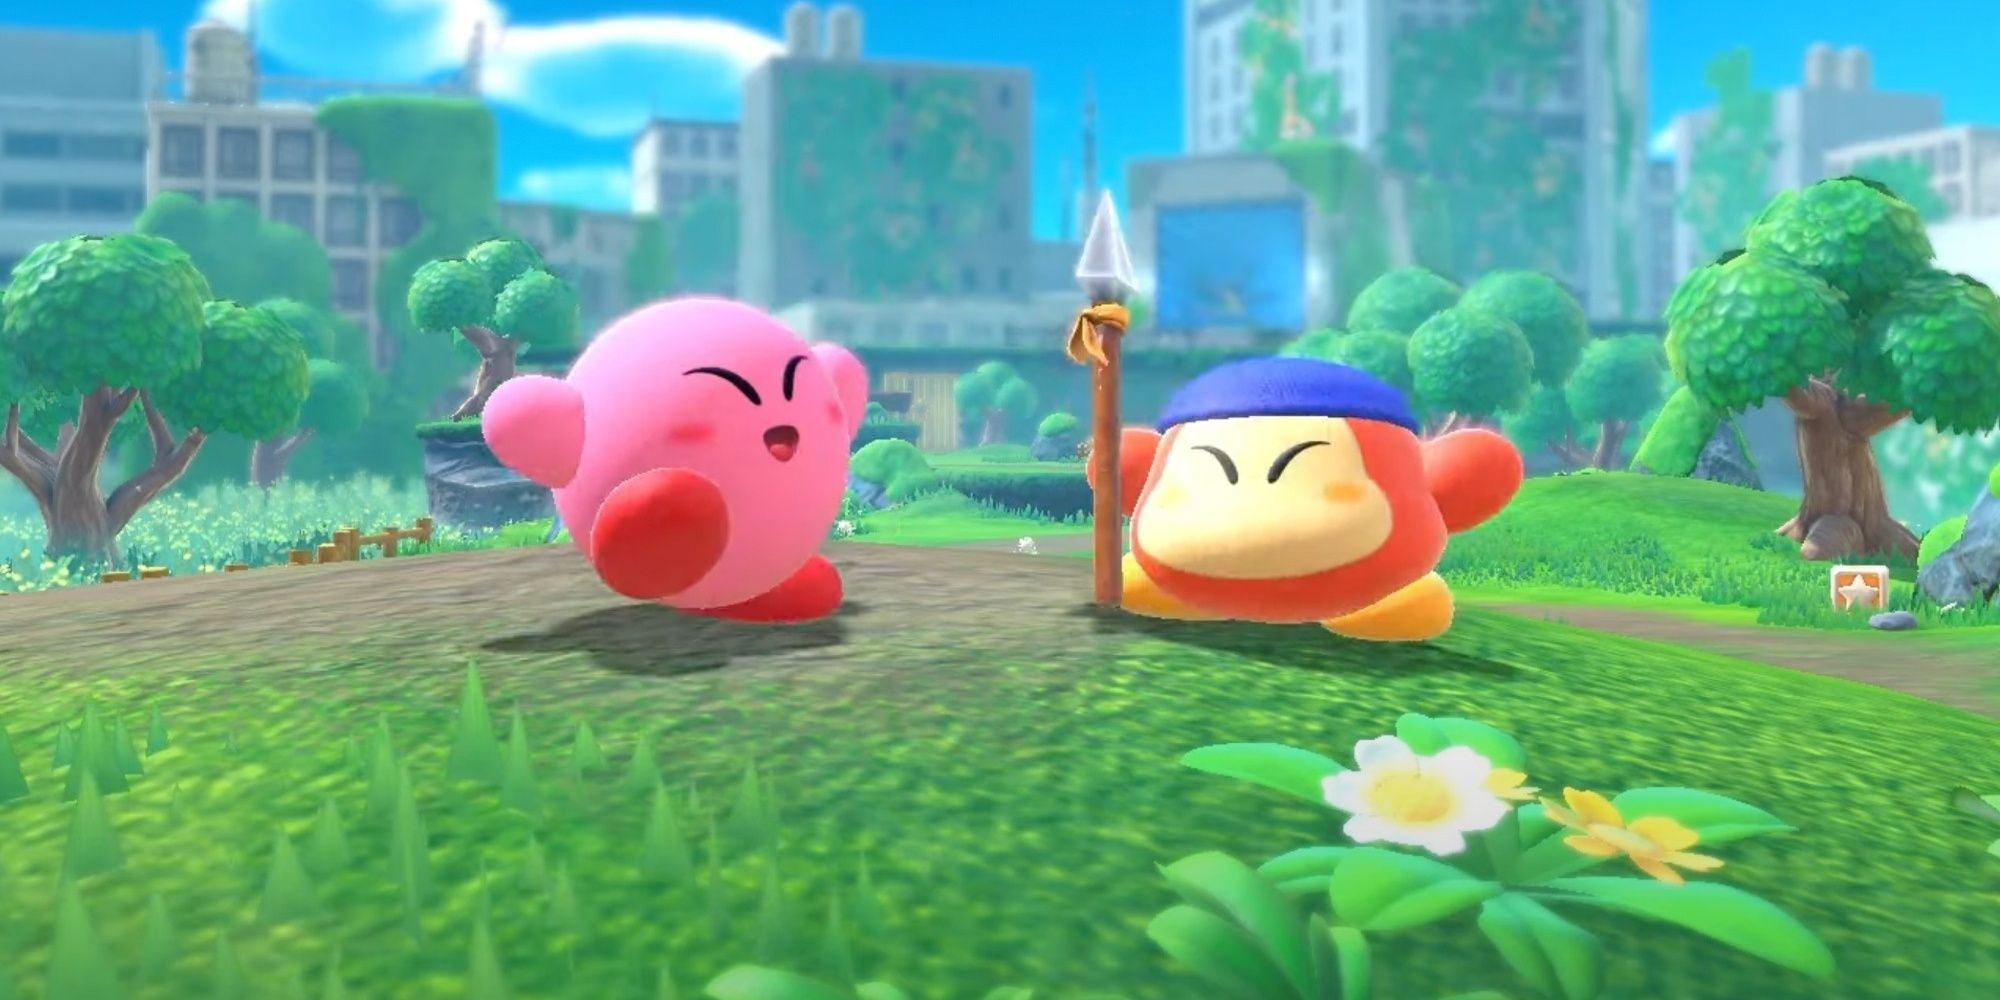 Kirby and Bandana Waddle Dee celebrating together in the early stages of Kirby and the Forgotten Land